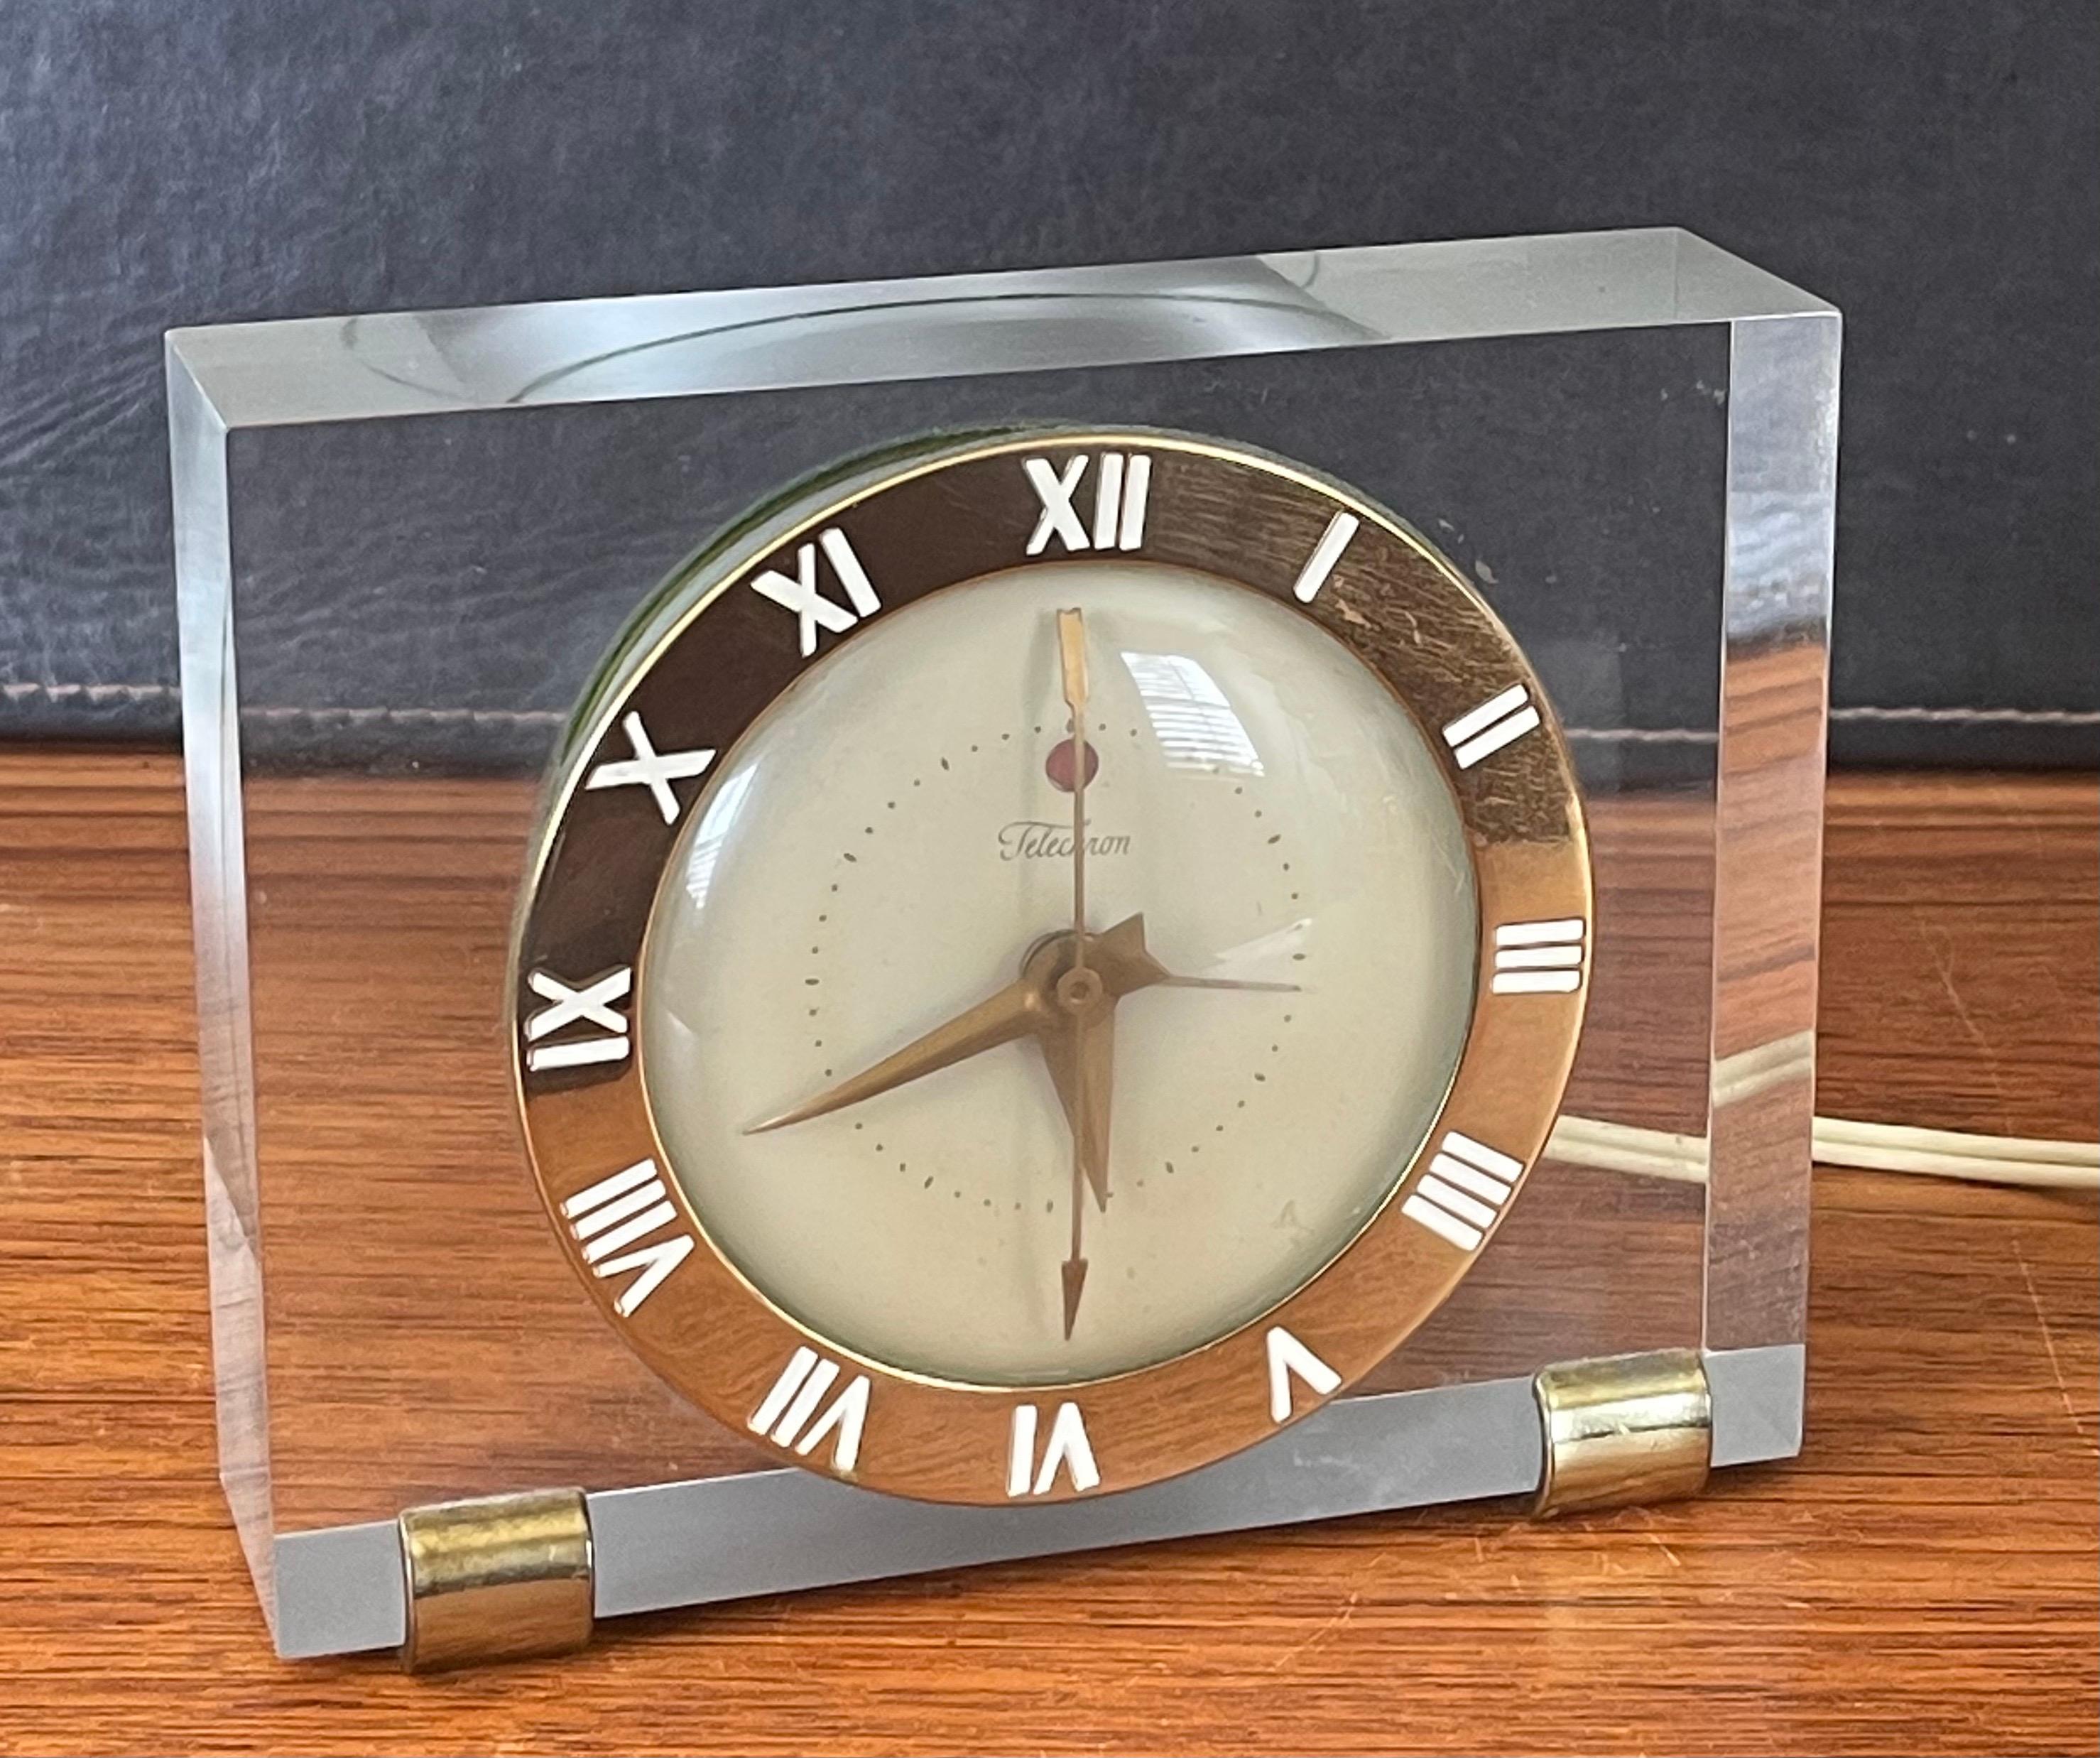 A gorgeous solid lucite with brass accents electric desk / mantel clock by Telechron, circa 1940s. The clock is in very good working condition and keeps accurate time. The brass dial has white Roman numerals and a cream colored face. Great art deco